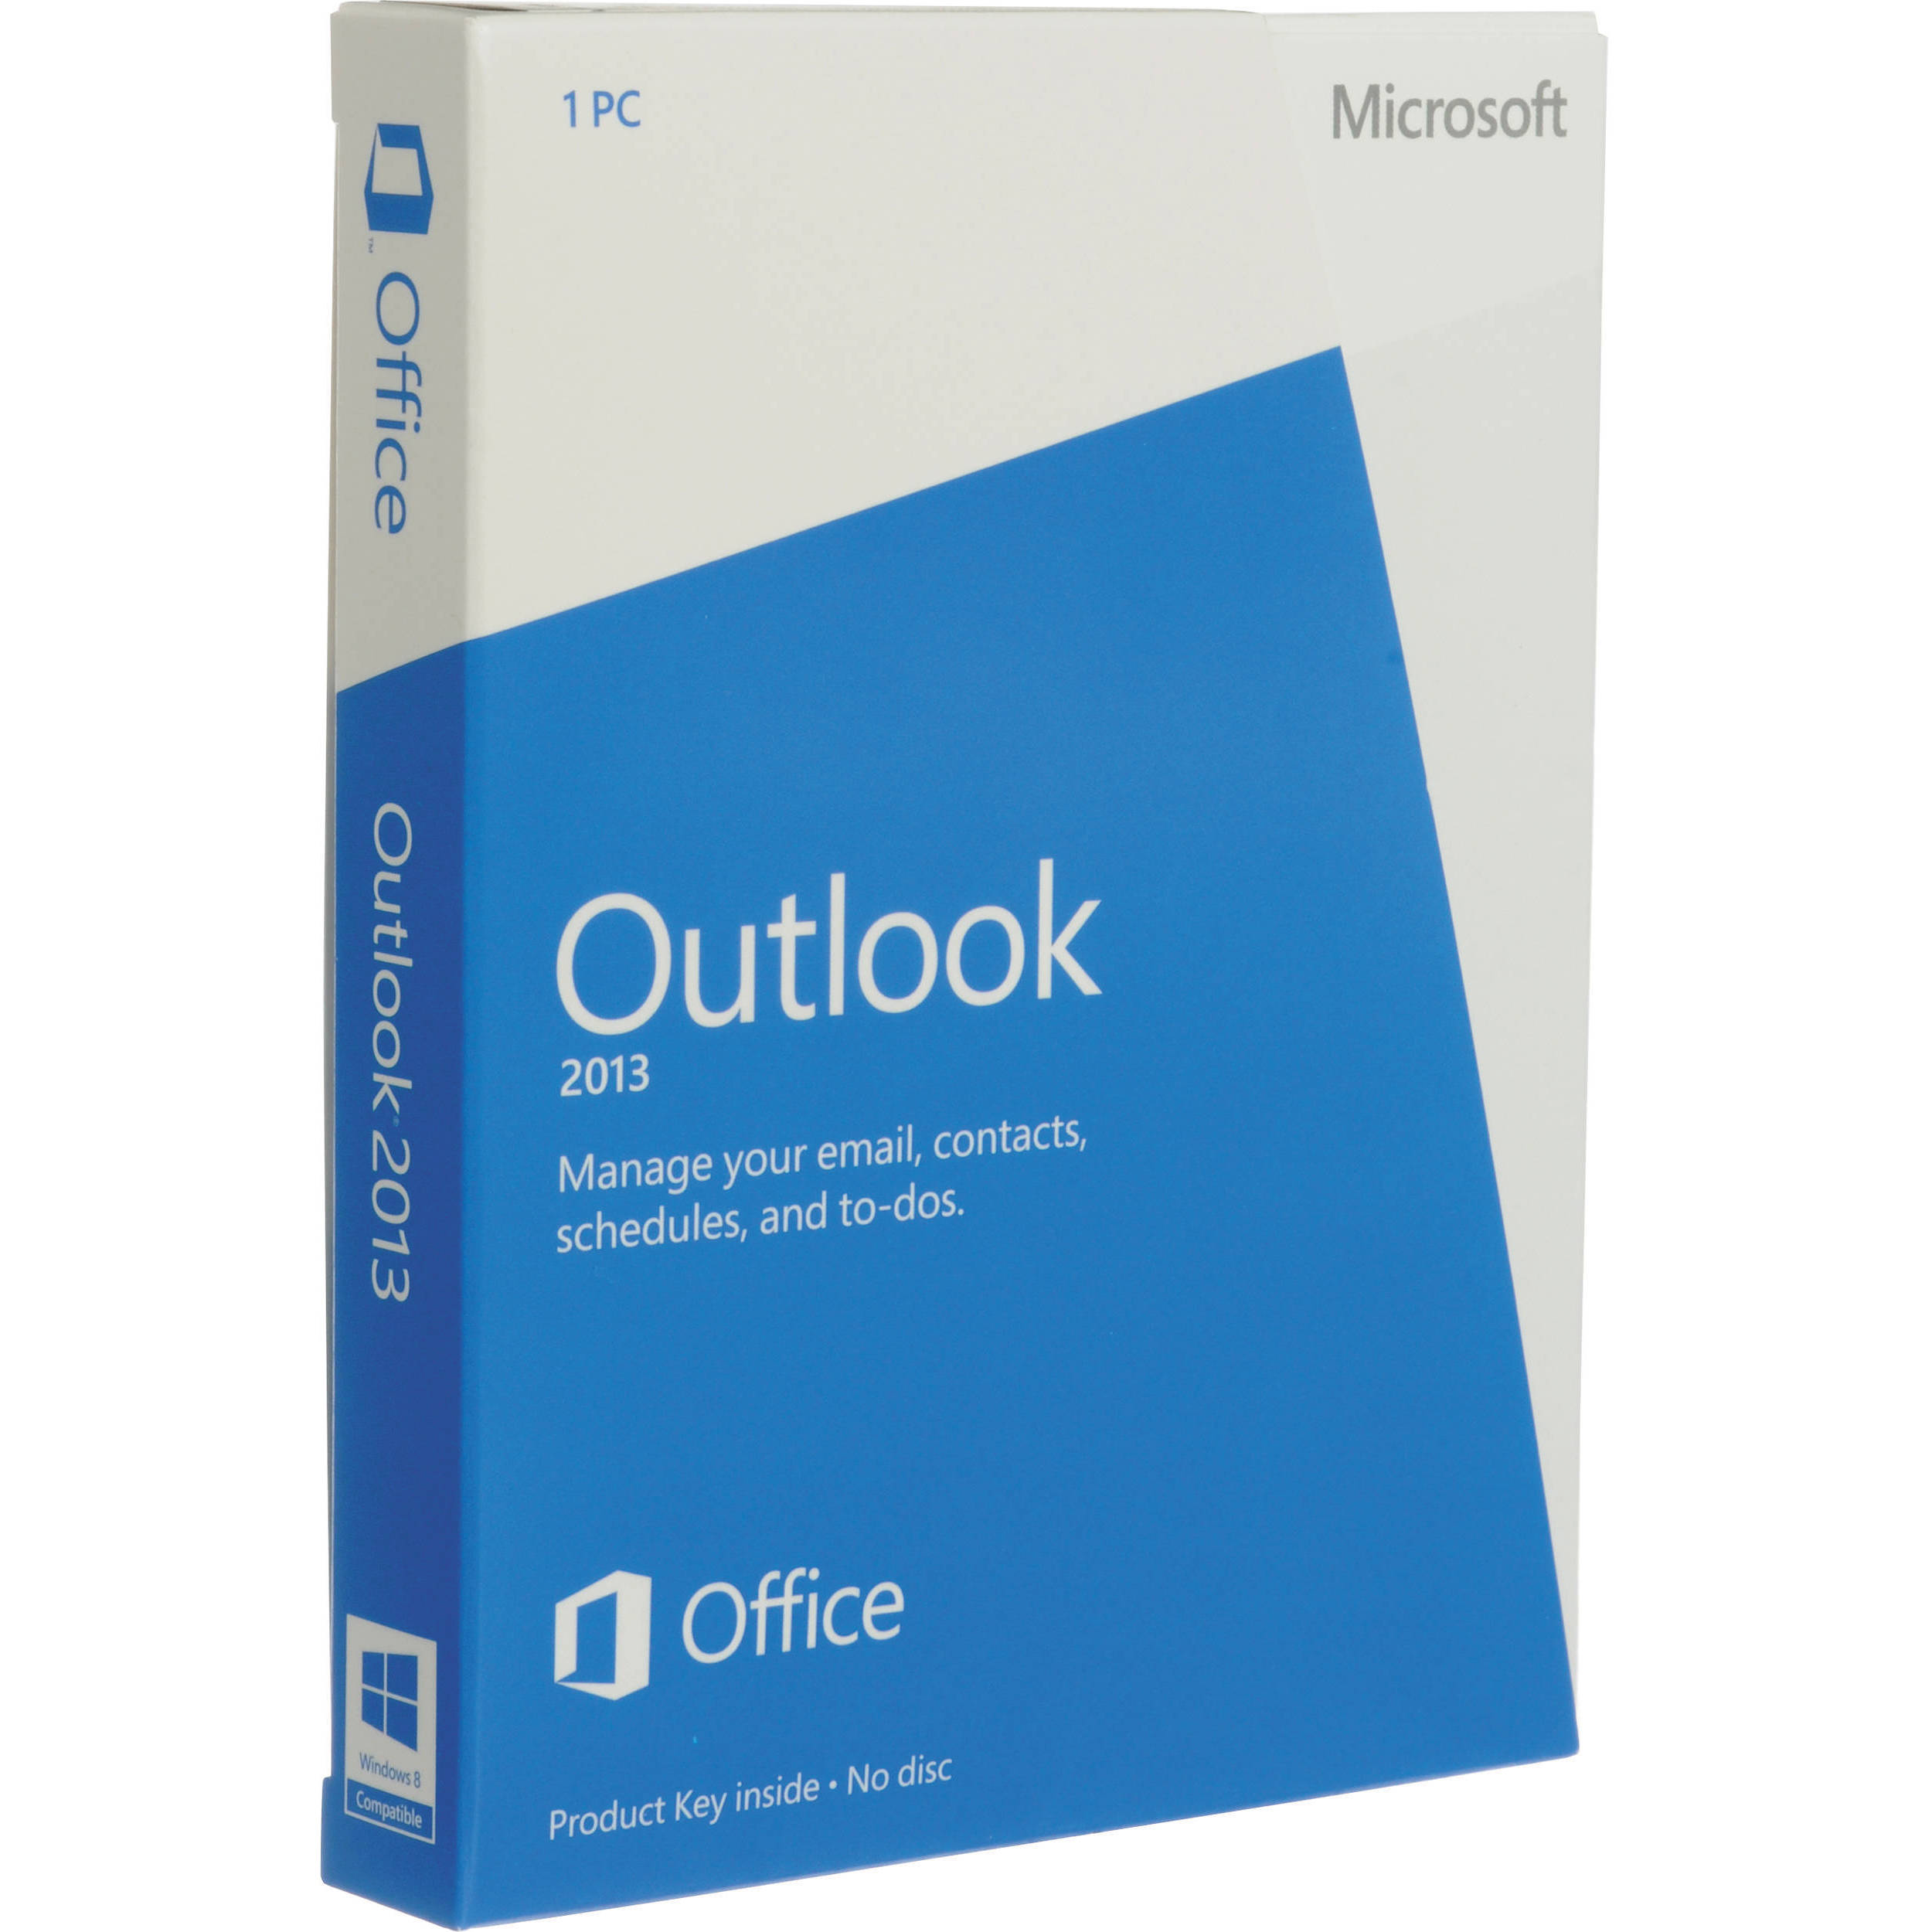 Download Scanpstexe For Outlook 2013